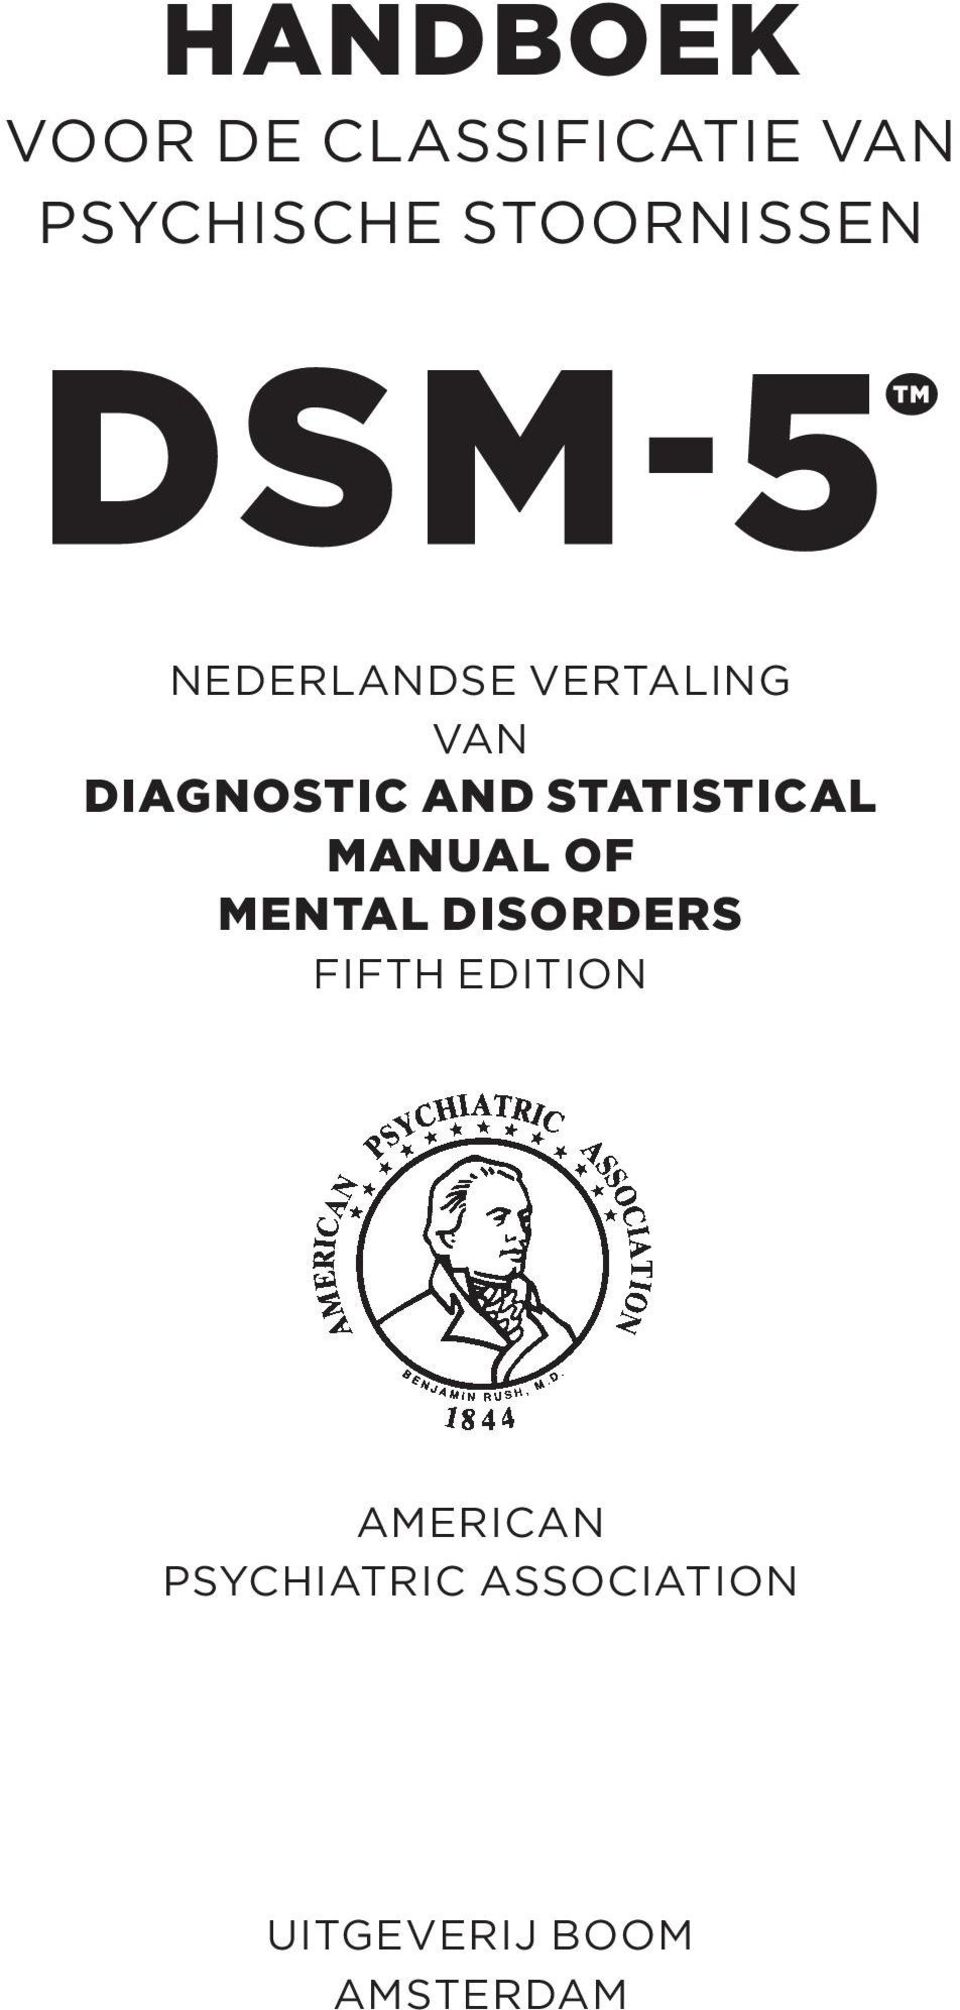 STATISTICAL MANUAL OF MENTAL DISORDERS FIFTH EDITION